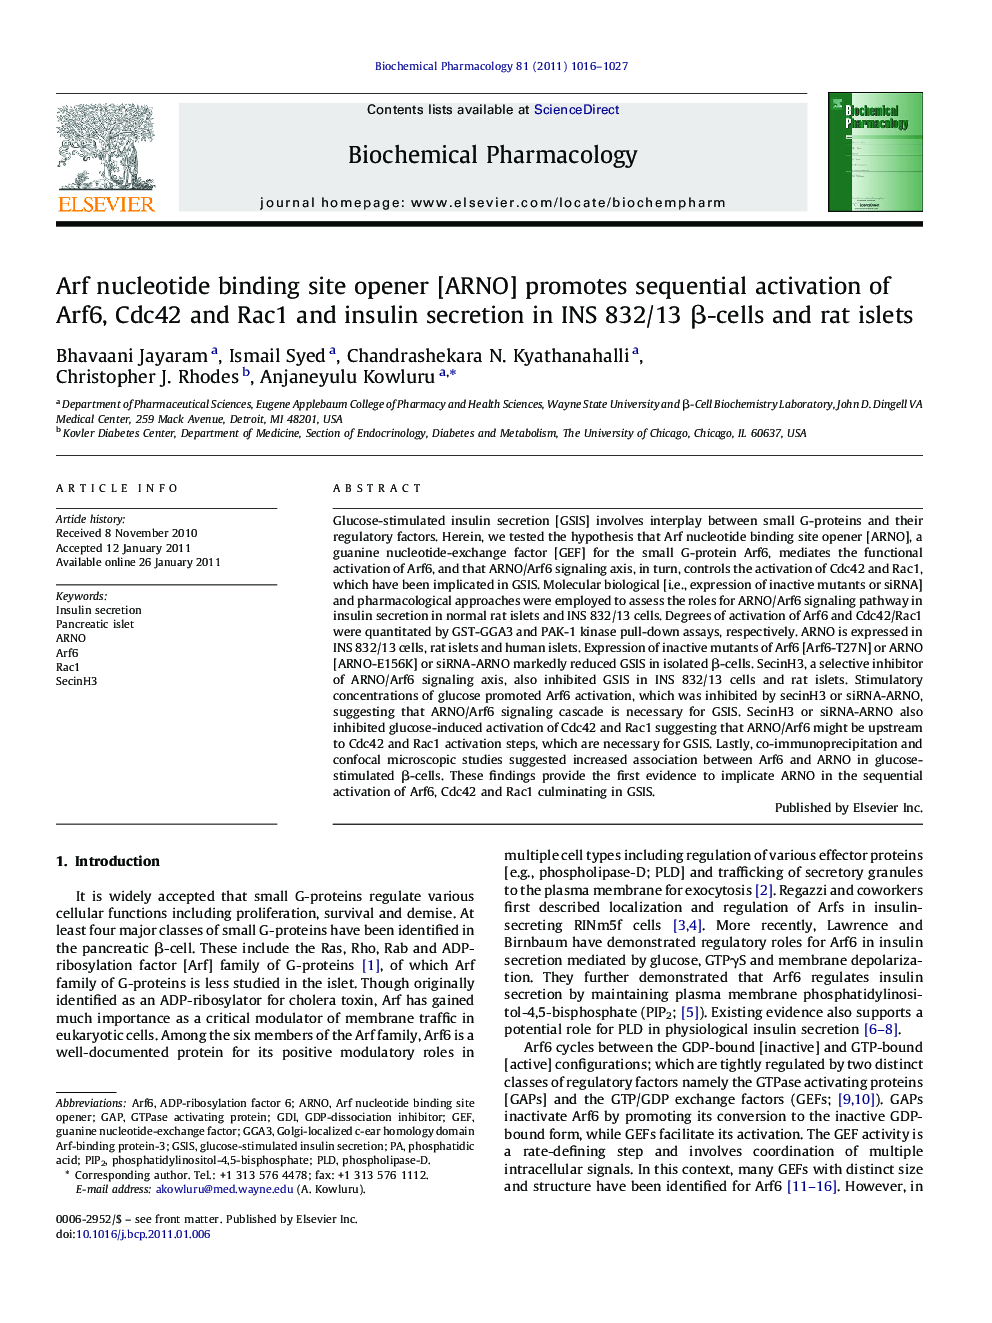 Arf nucleotide binding site opener [ARNO] promotes sequential activation of Arf6, Cdc42 and Rac1 and insulin secretion in INS 832/13 β-cells and rat islets